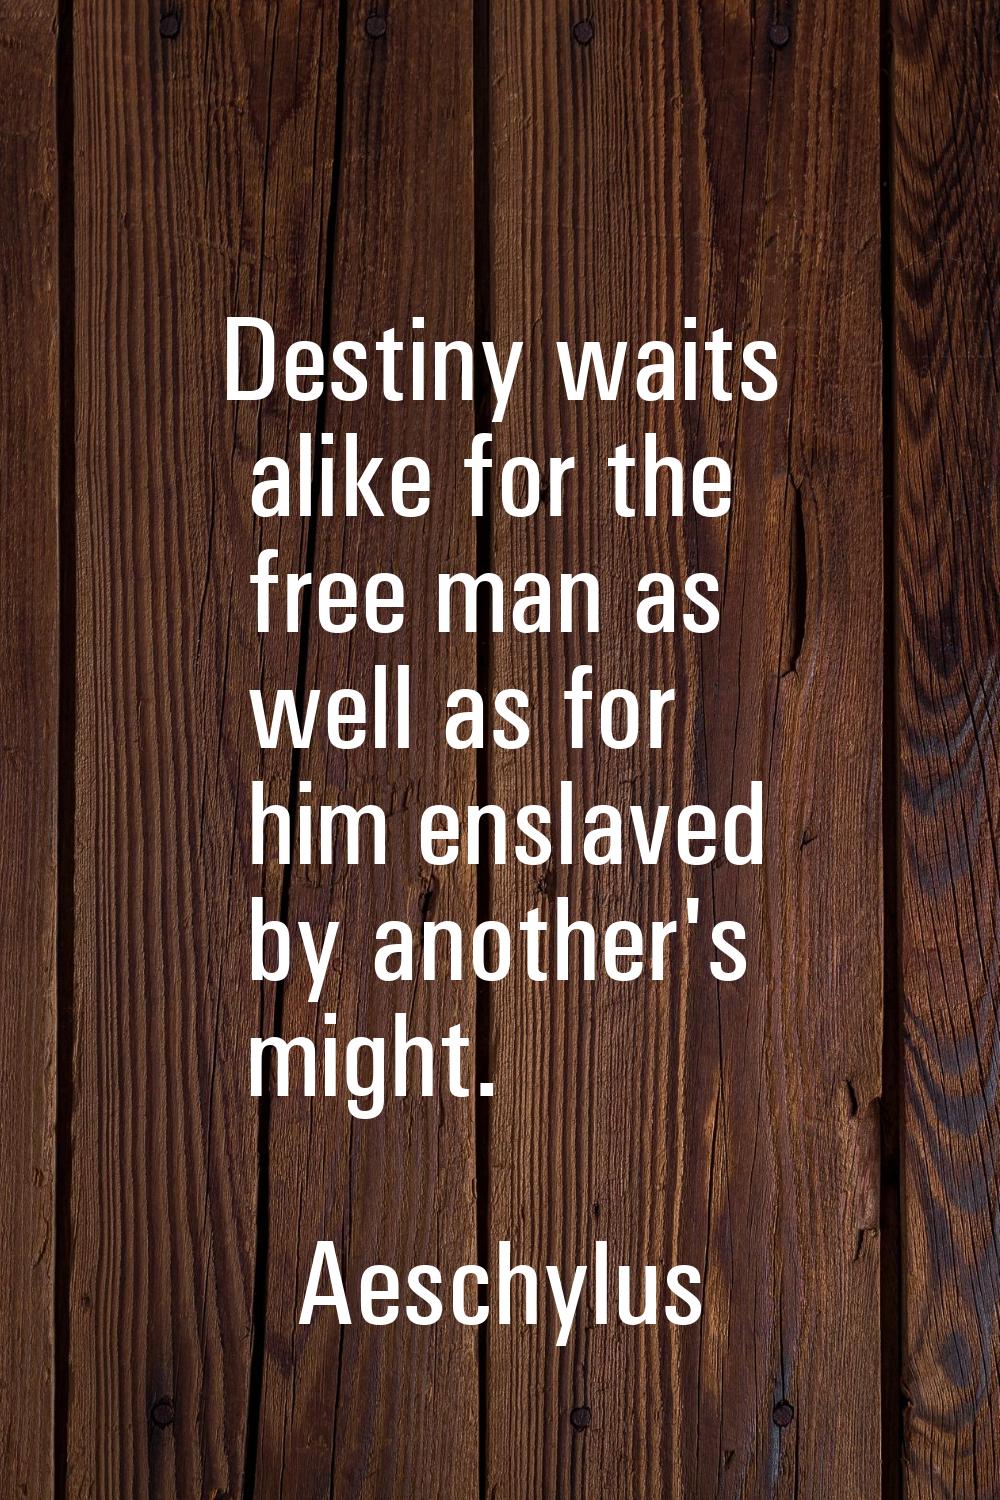 Destiny waits alike for the free man as well as for him enslaved by another's might.